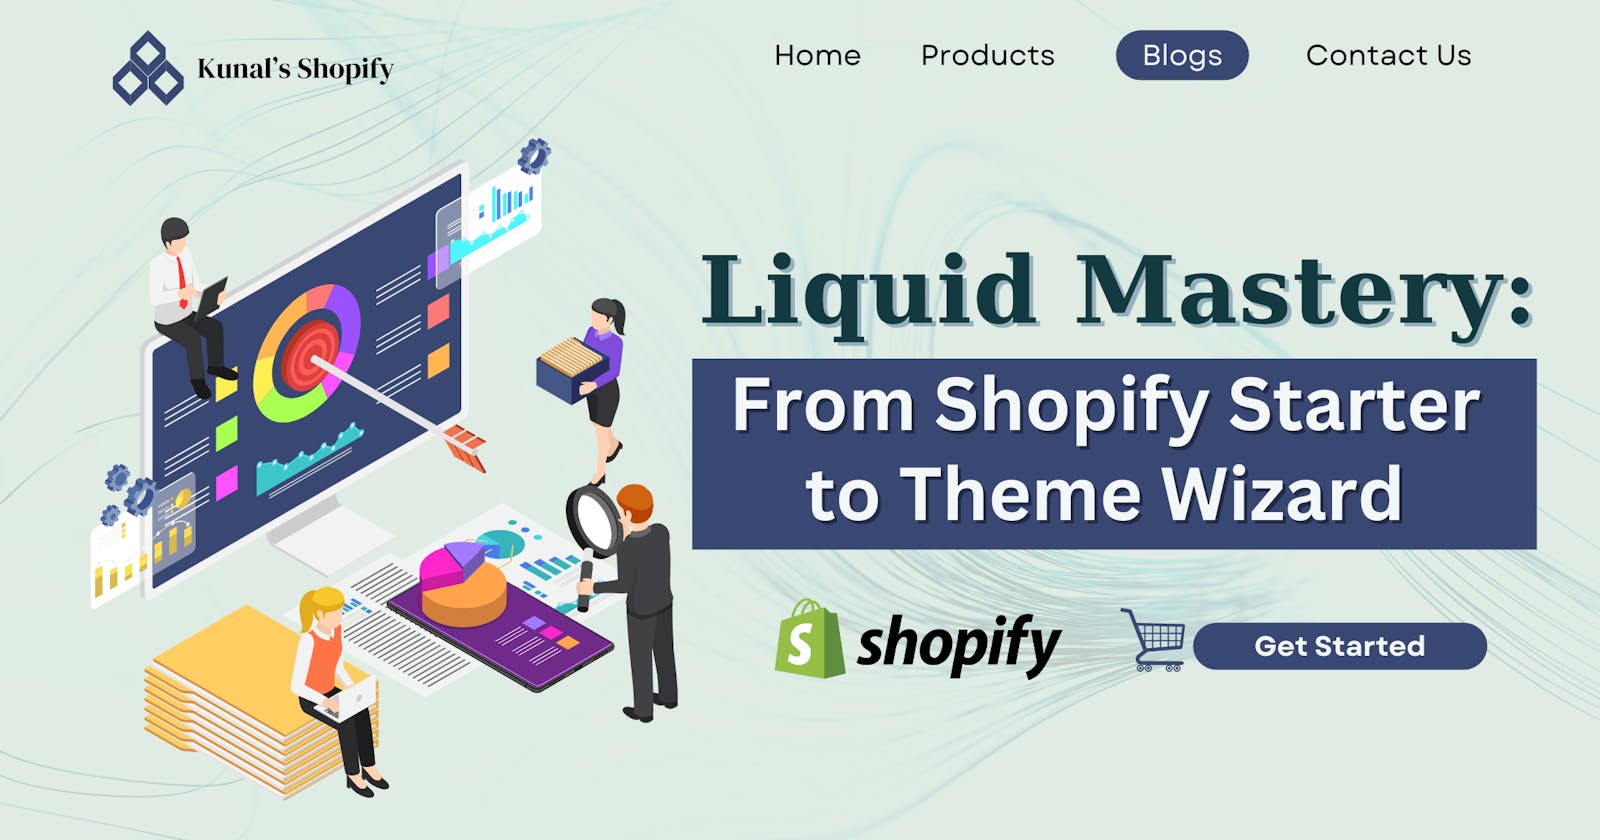 Liquid Mastery: From Shopify Starter to Theme Wizard